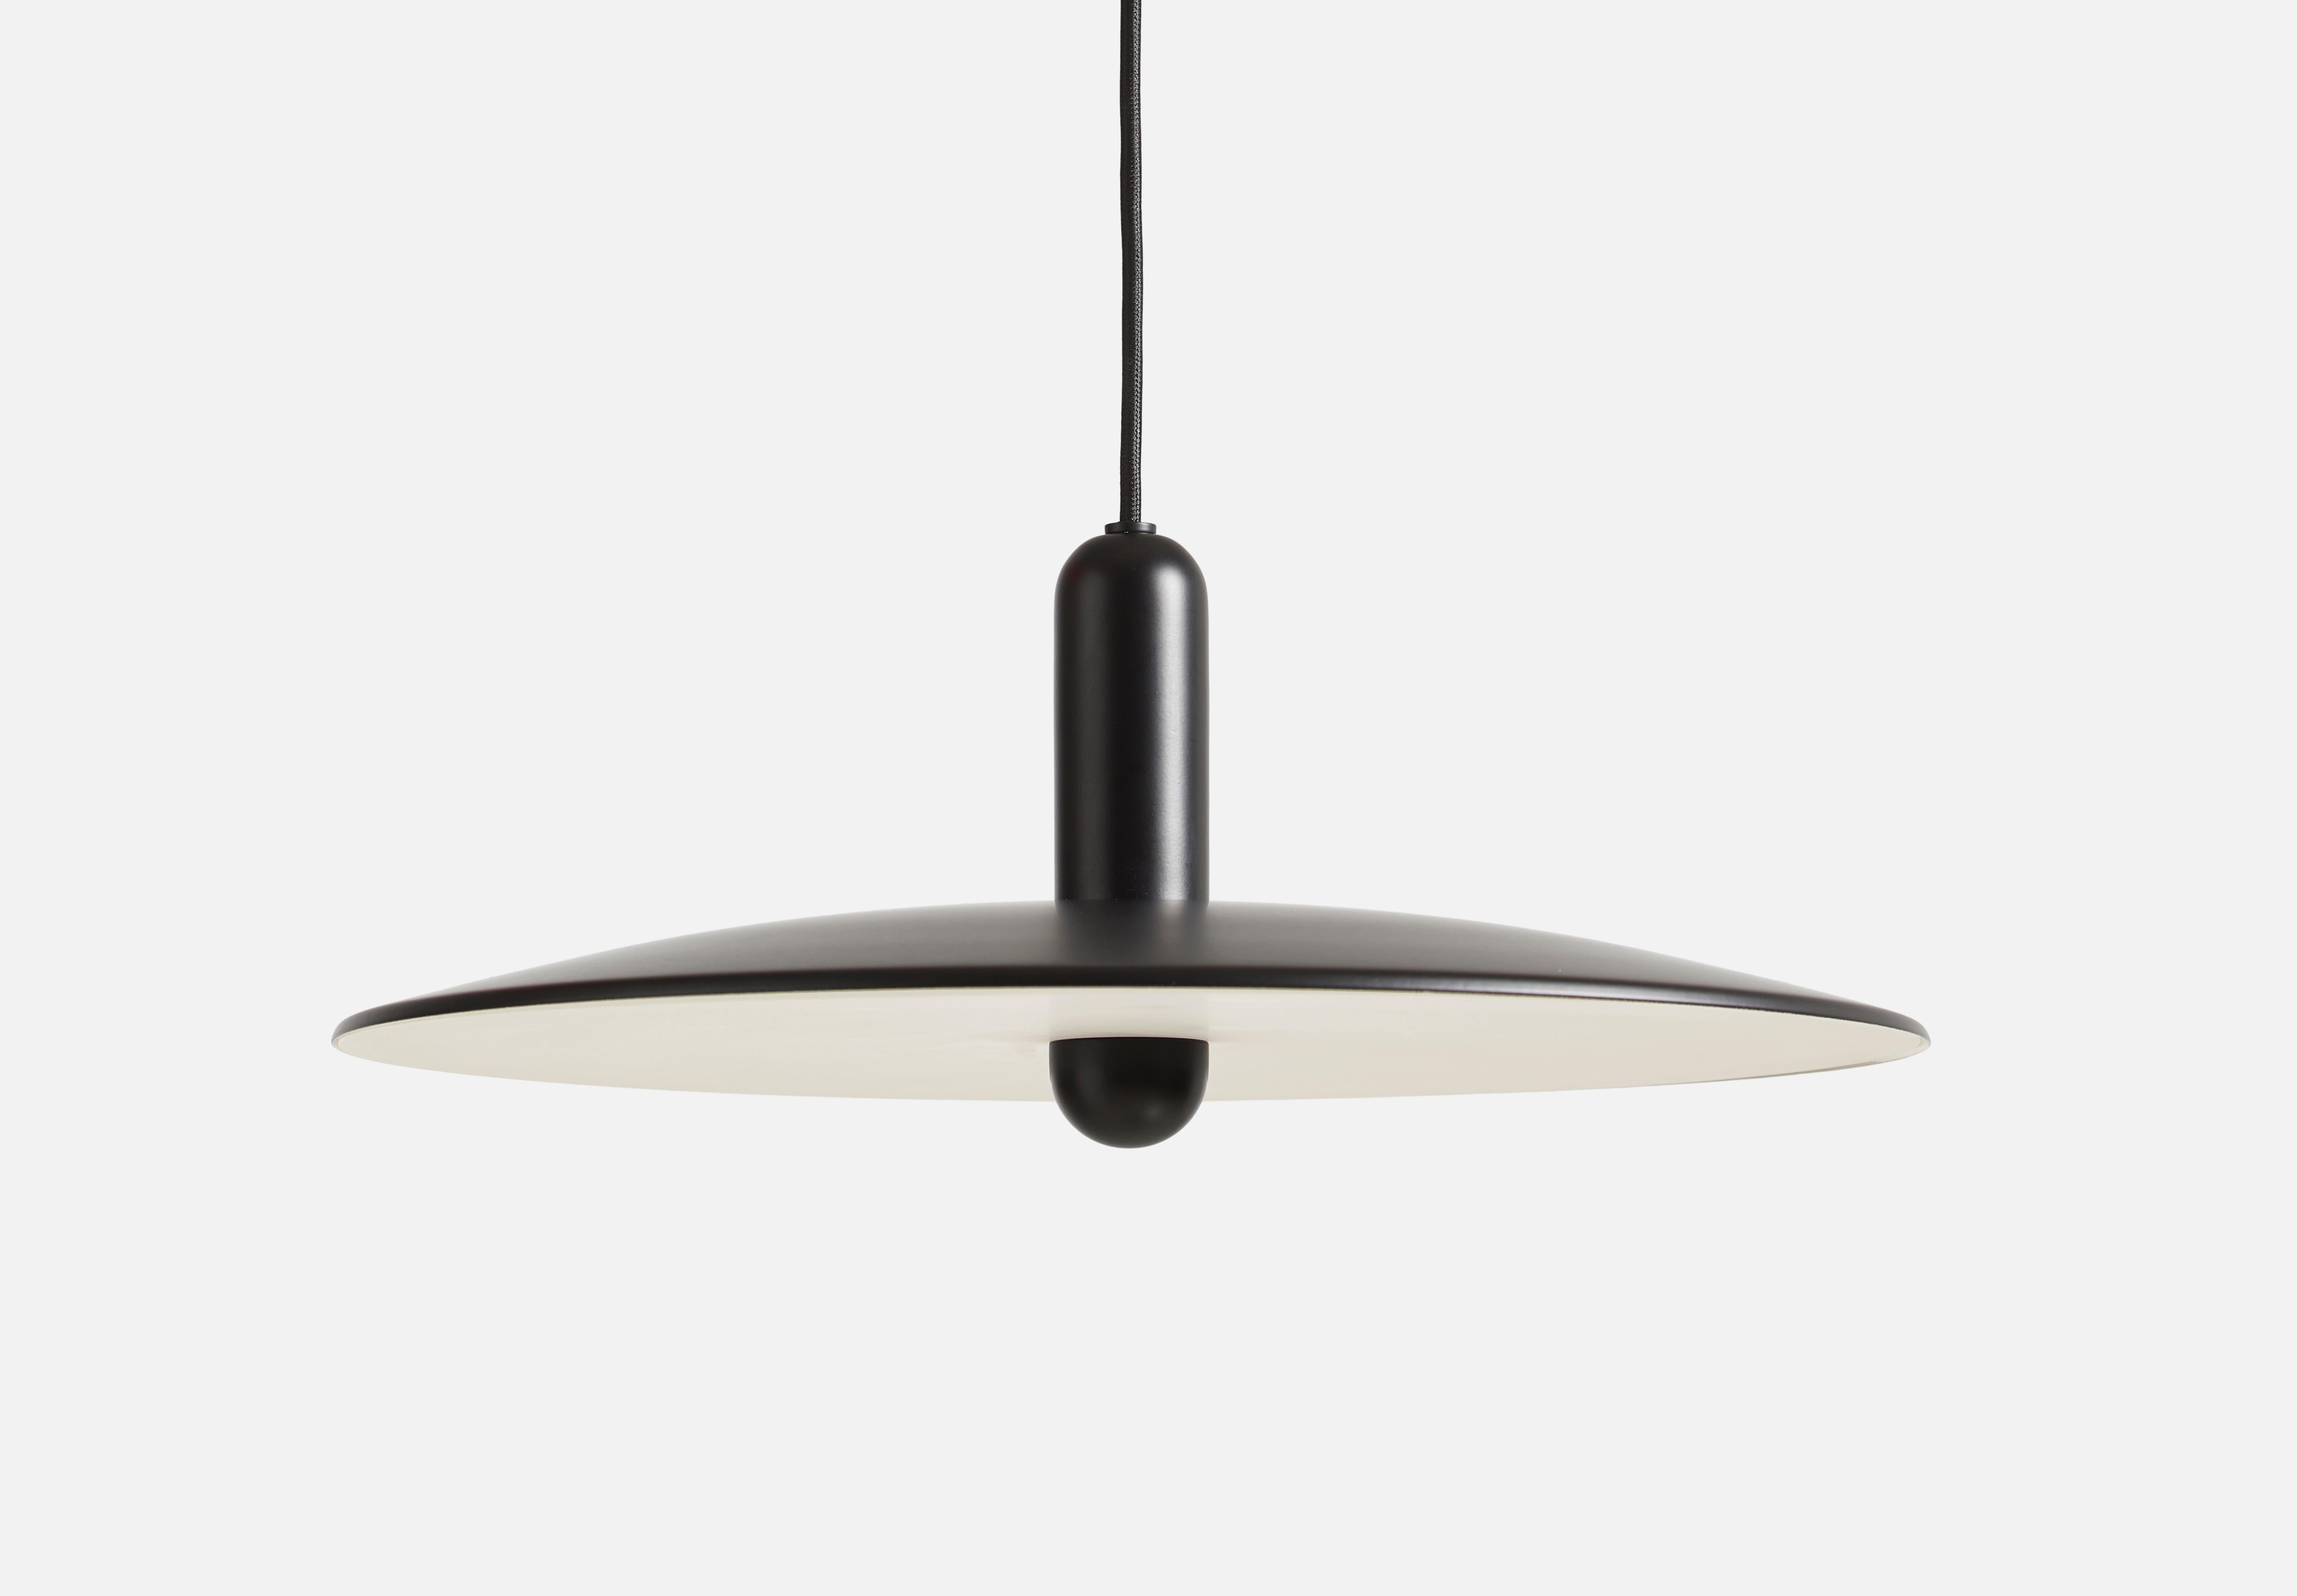 Large black Lu pendant lamp by Beaverhausen
Materials: metal.
Dimensions: D 45 x H 22 cm
Available in black or taupe and in 2 sizes: D33, D45 cm.

Beaverhausen is a Brussels-based design studio founded by Mimy A. Diar and Ad Luijten. Both have